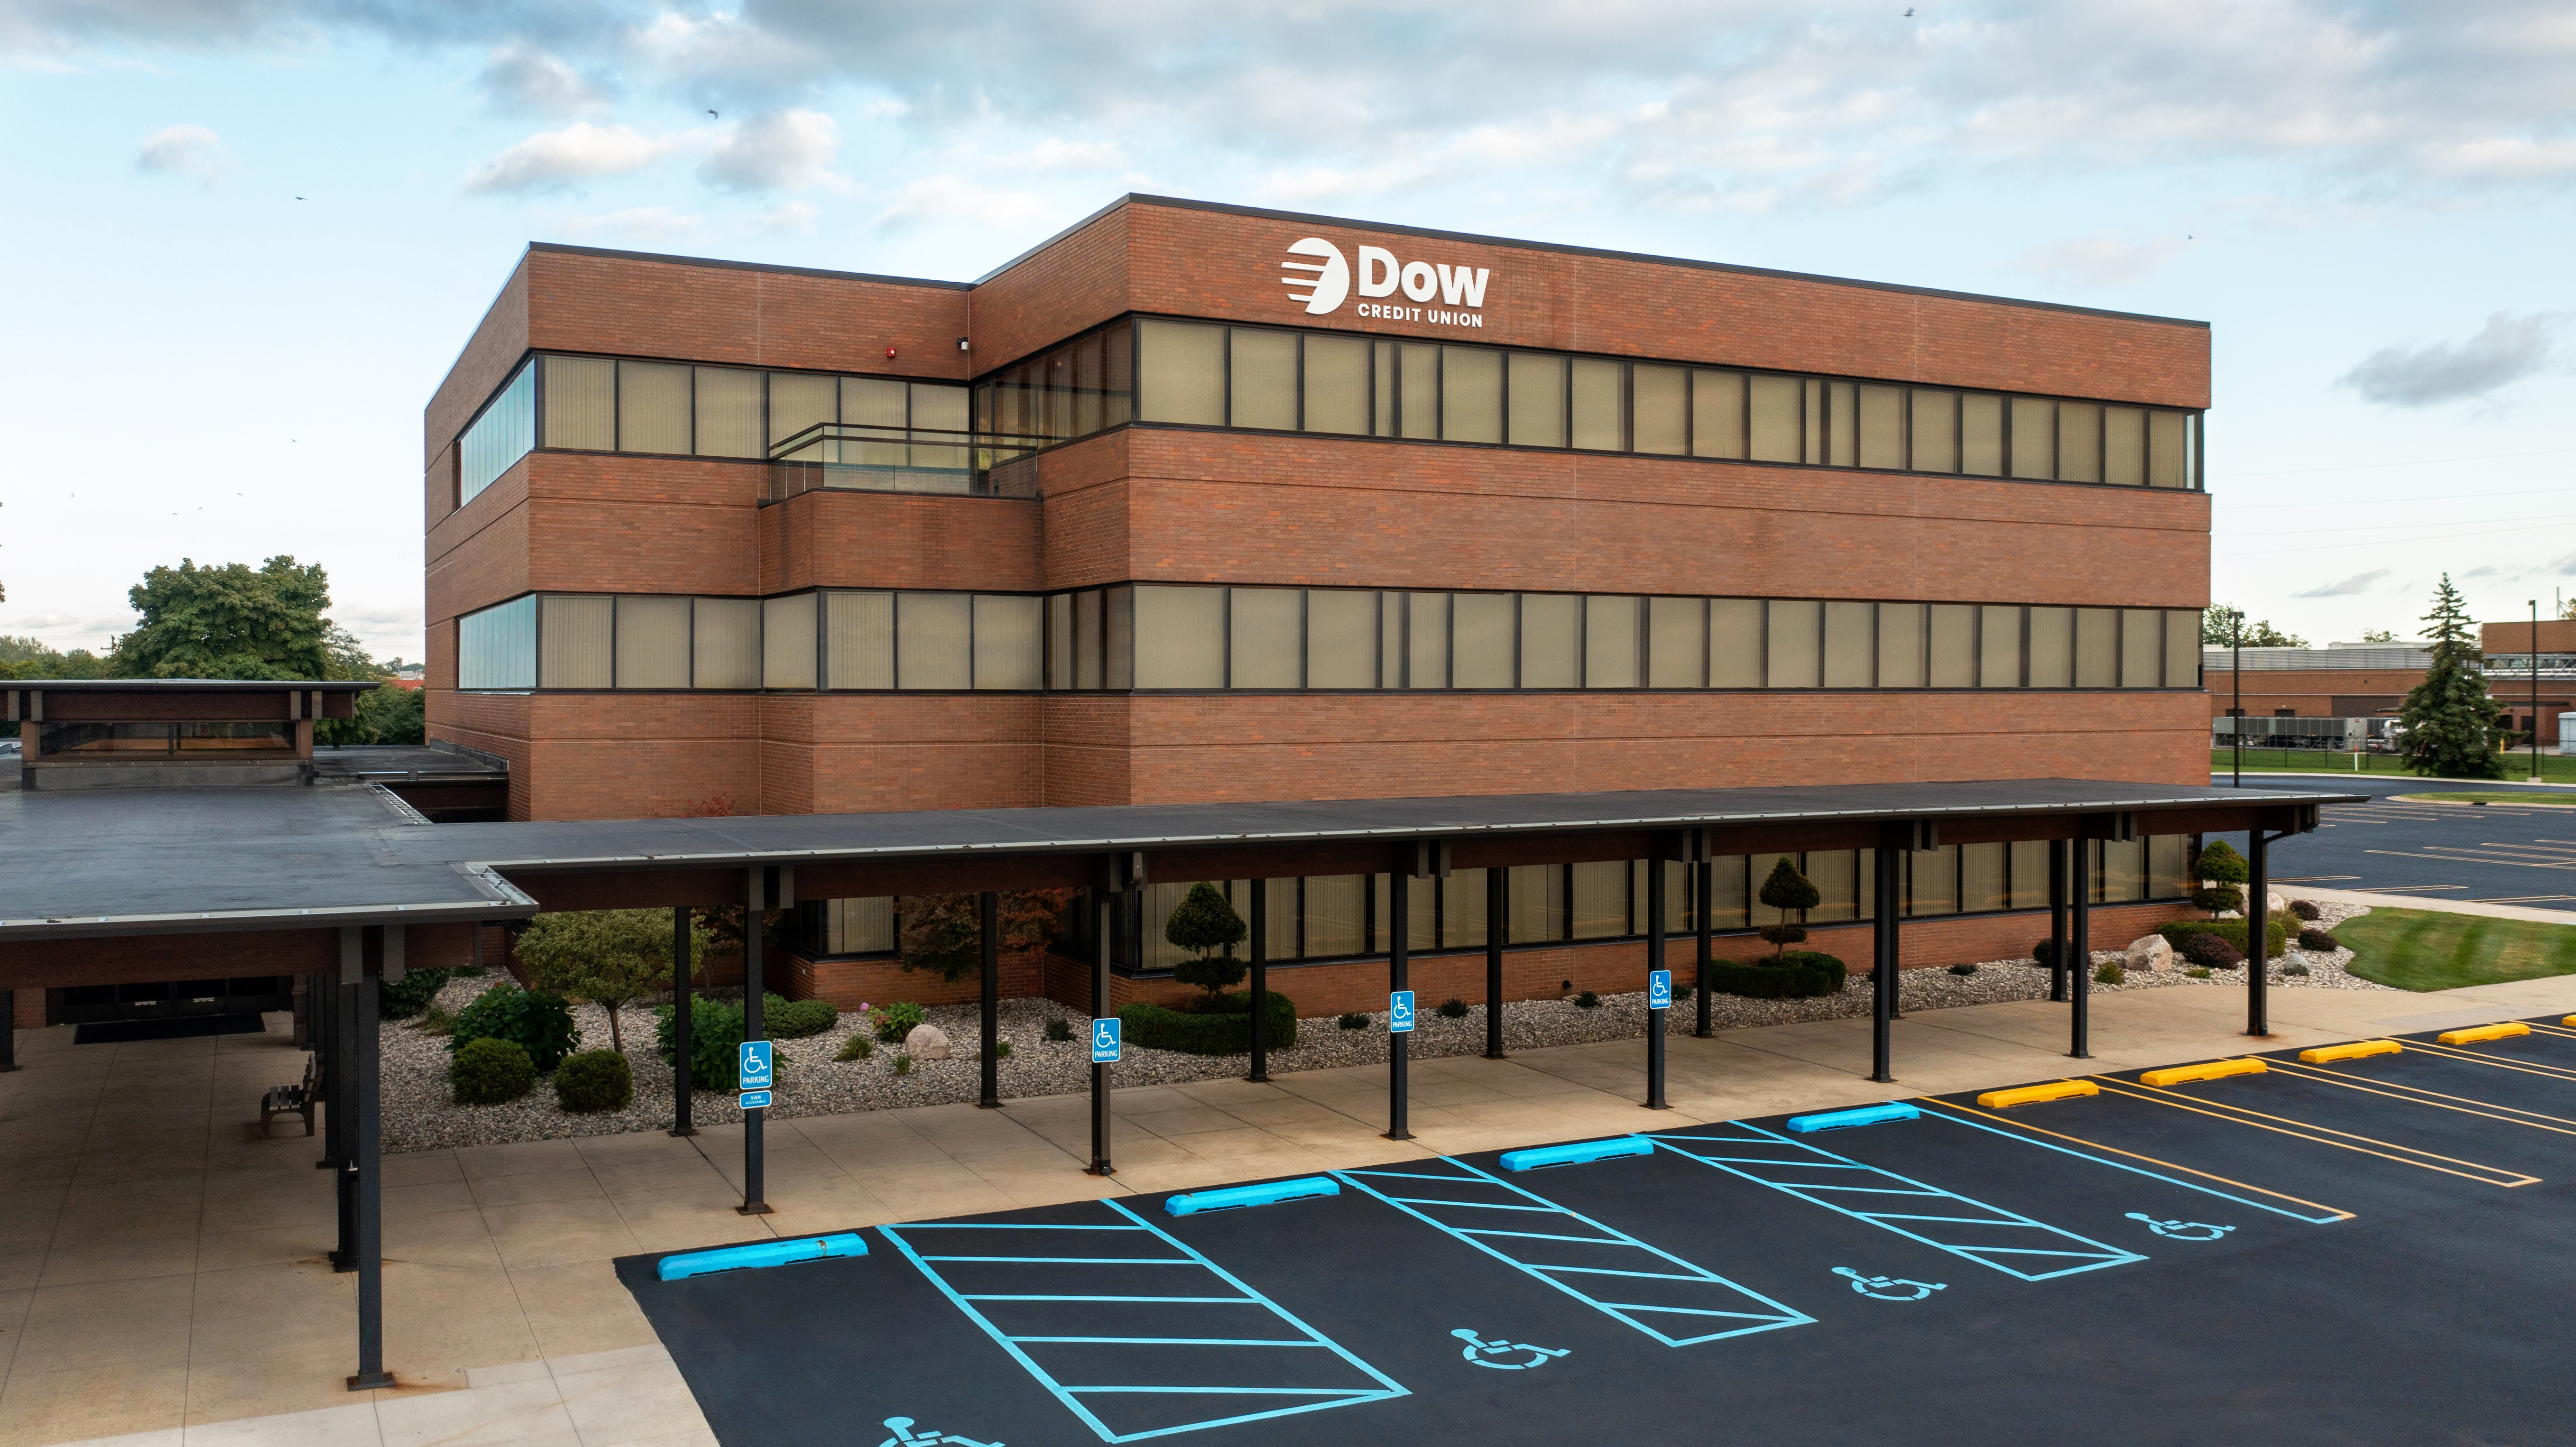 An exterior photo of Dow Credit Union headquarters in Midland Michigan.